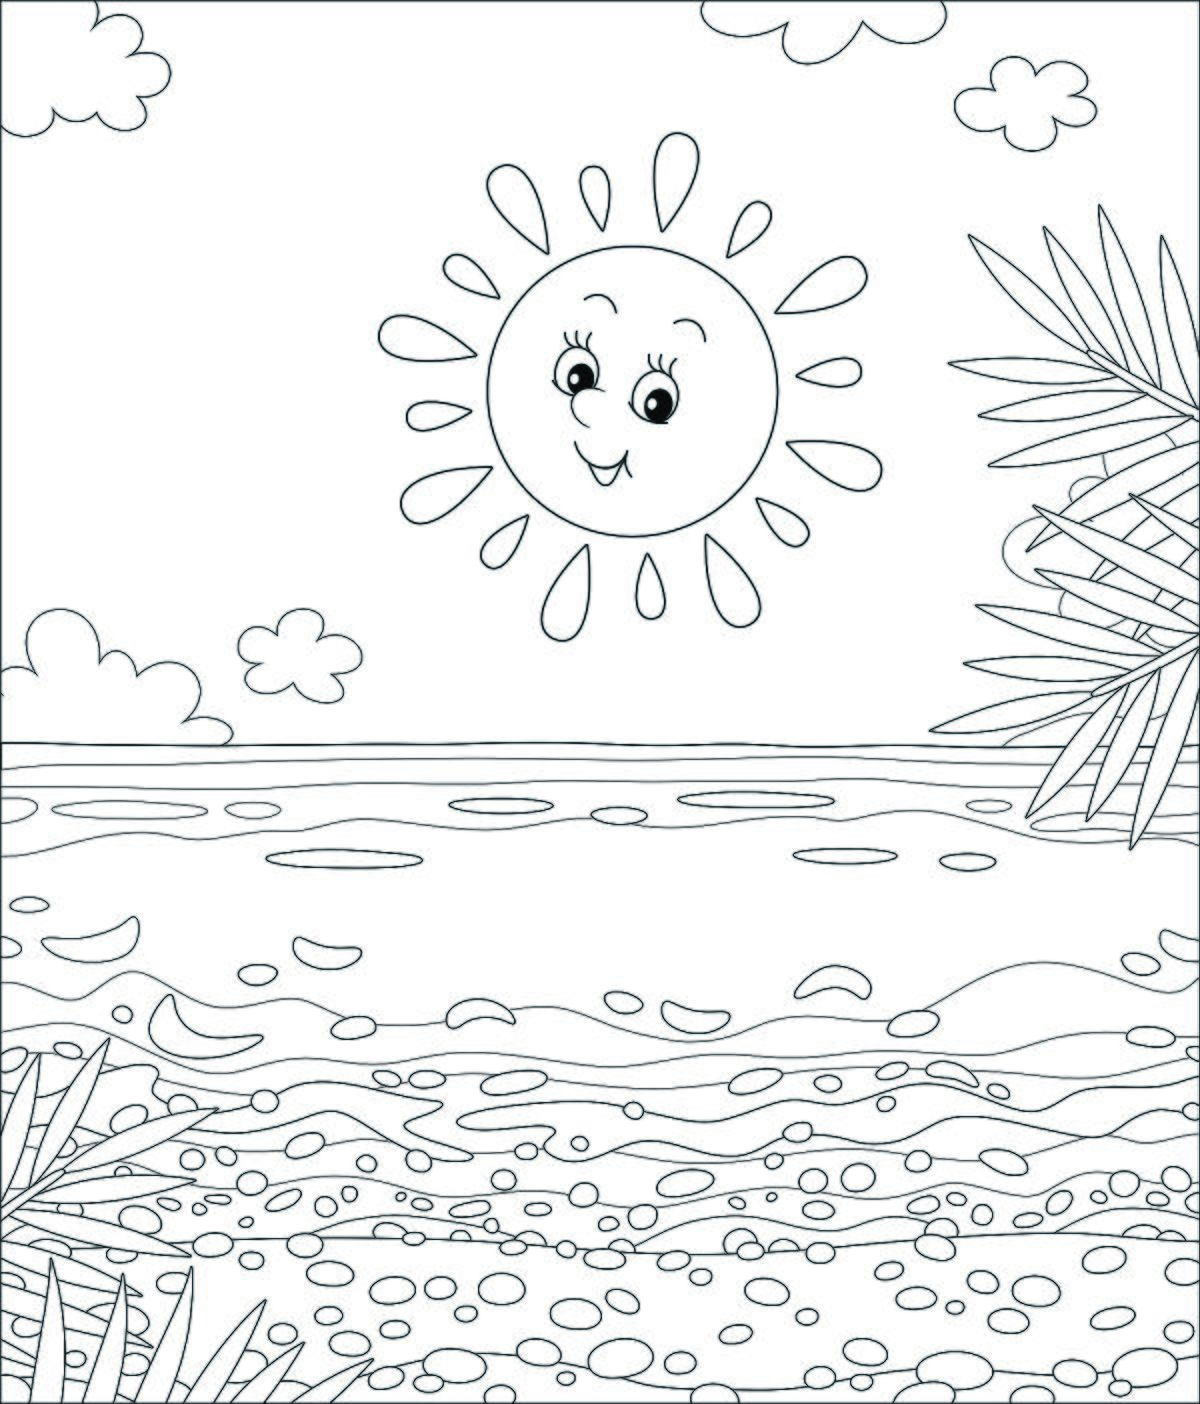 Weather coloring pages for kids fun free printable coloring pages of weather events â from hurricanes to sunny days printables mom